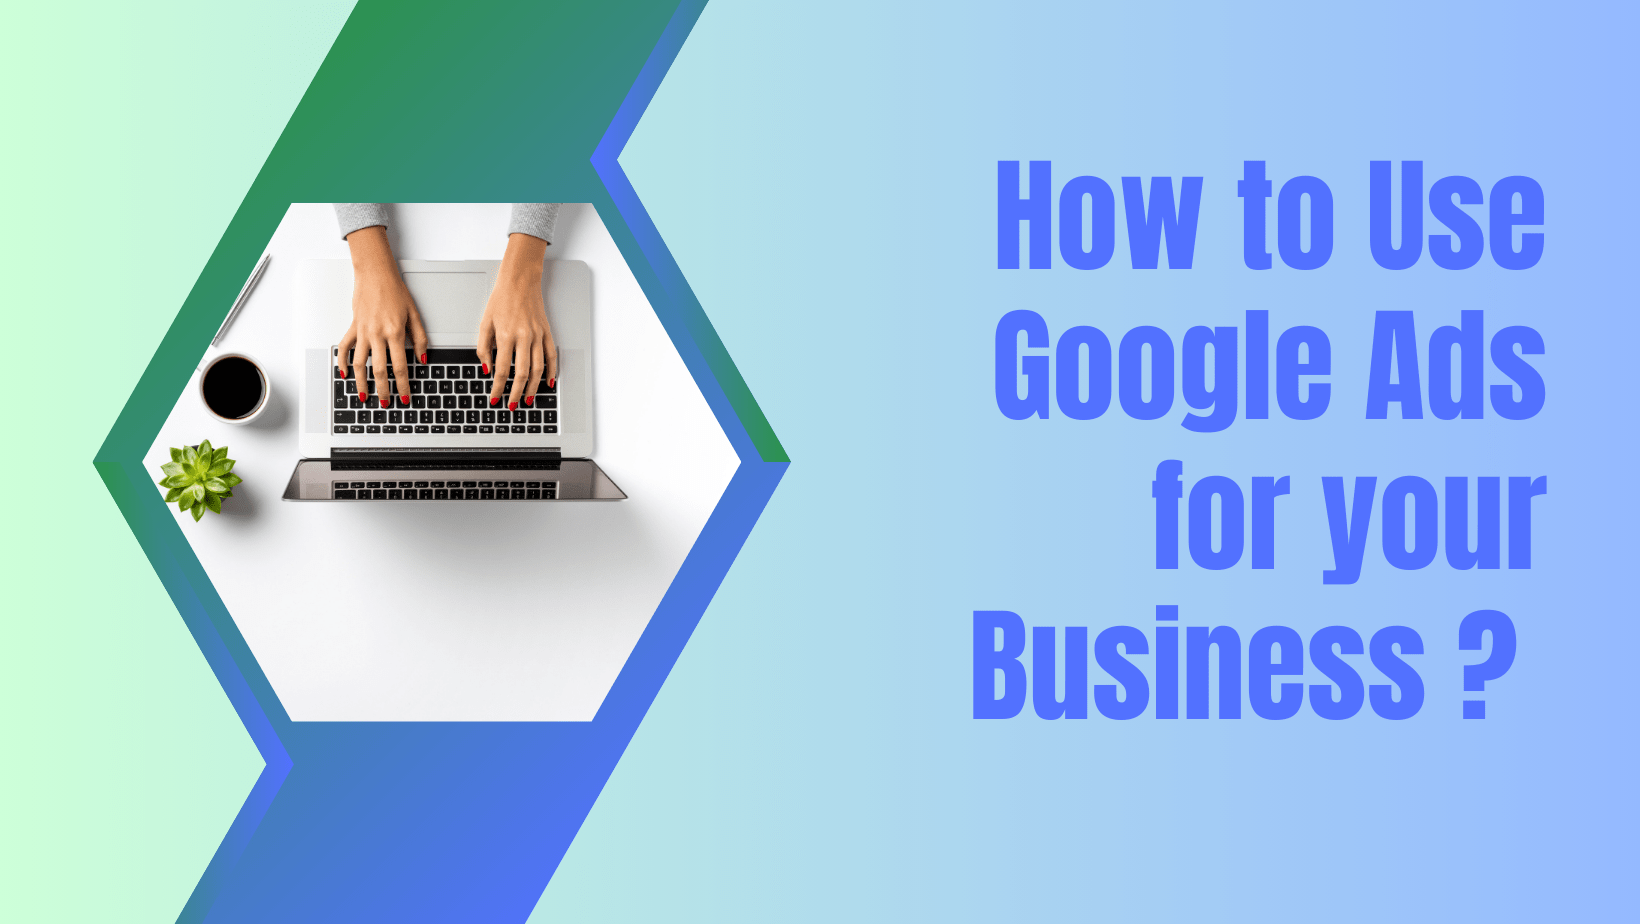 Google Ads Solution for your business